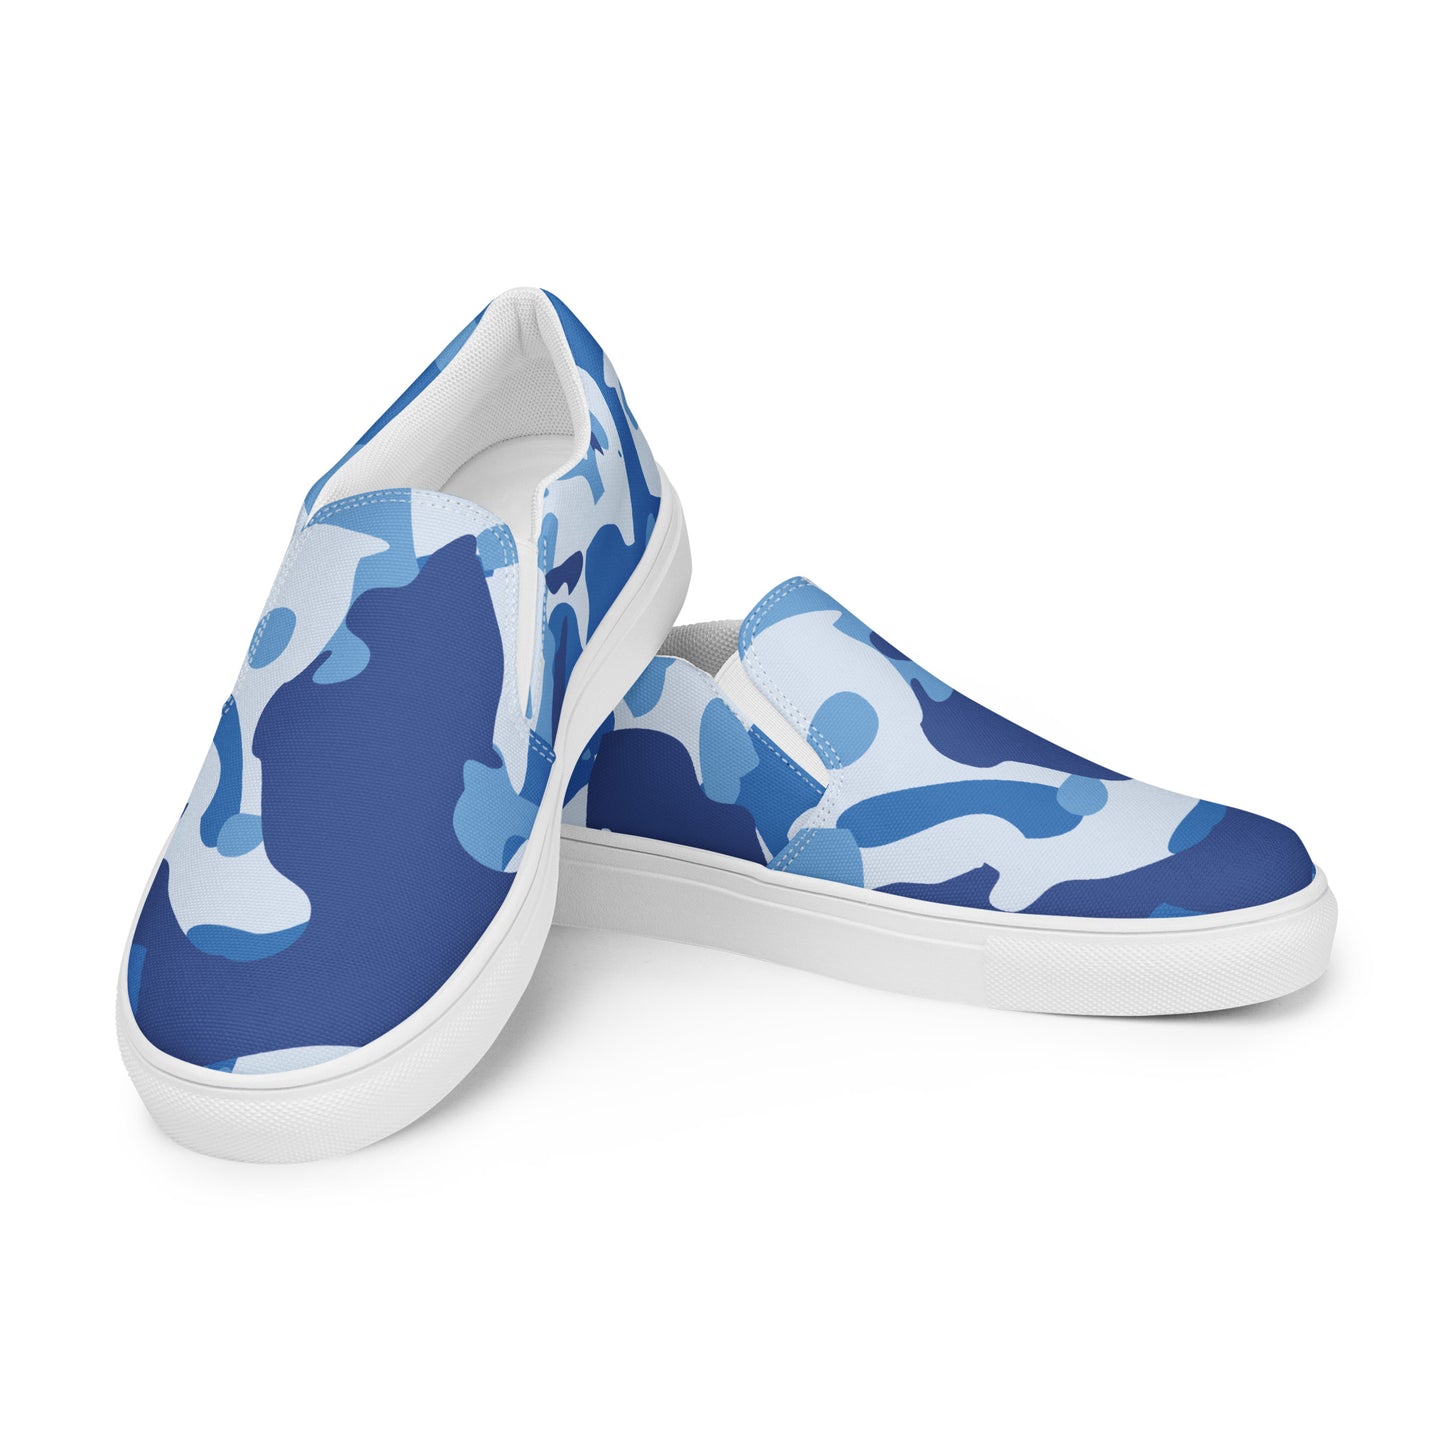 Blue Camo - Sustainably Made Men's Slip-On Canvas Shoes